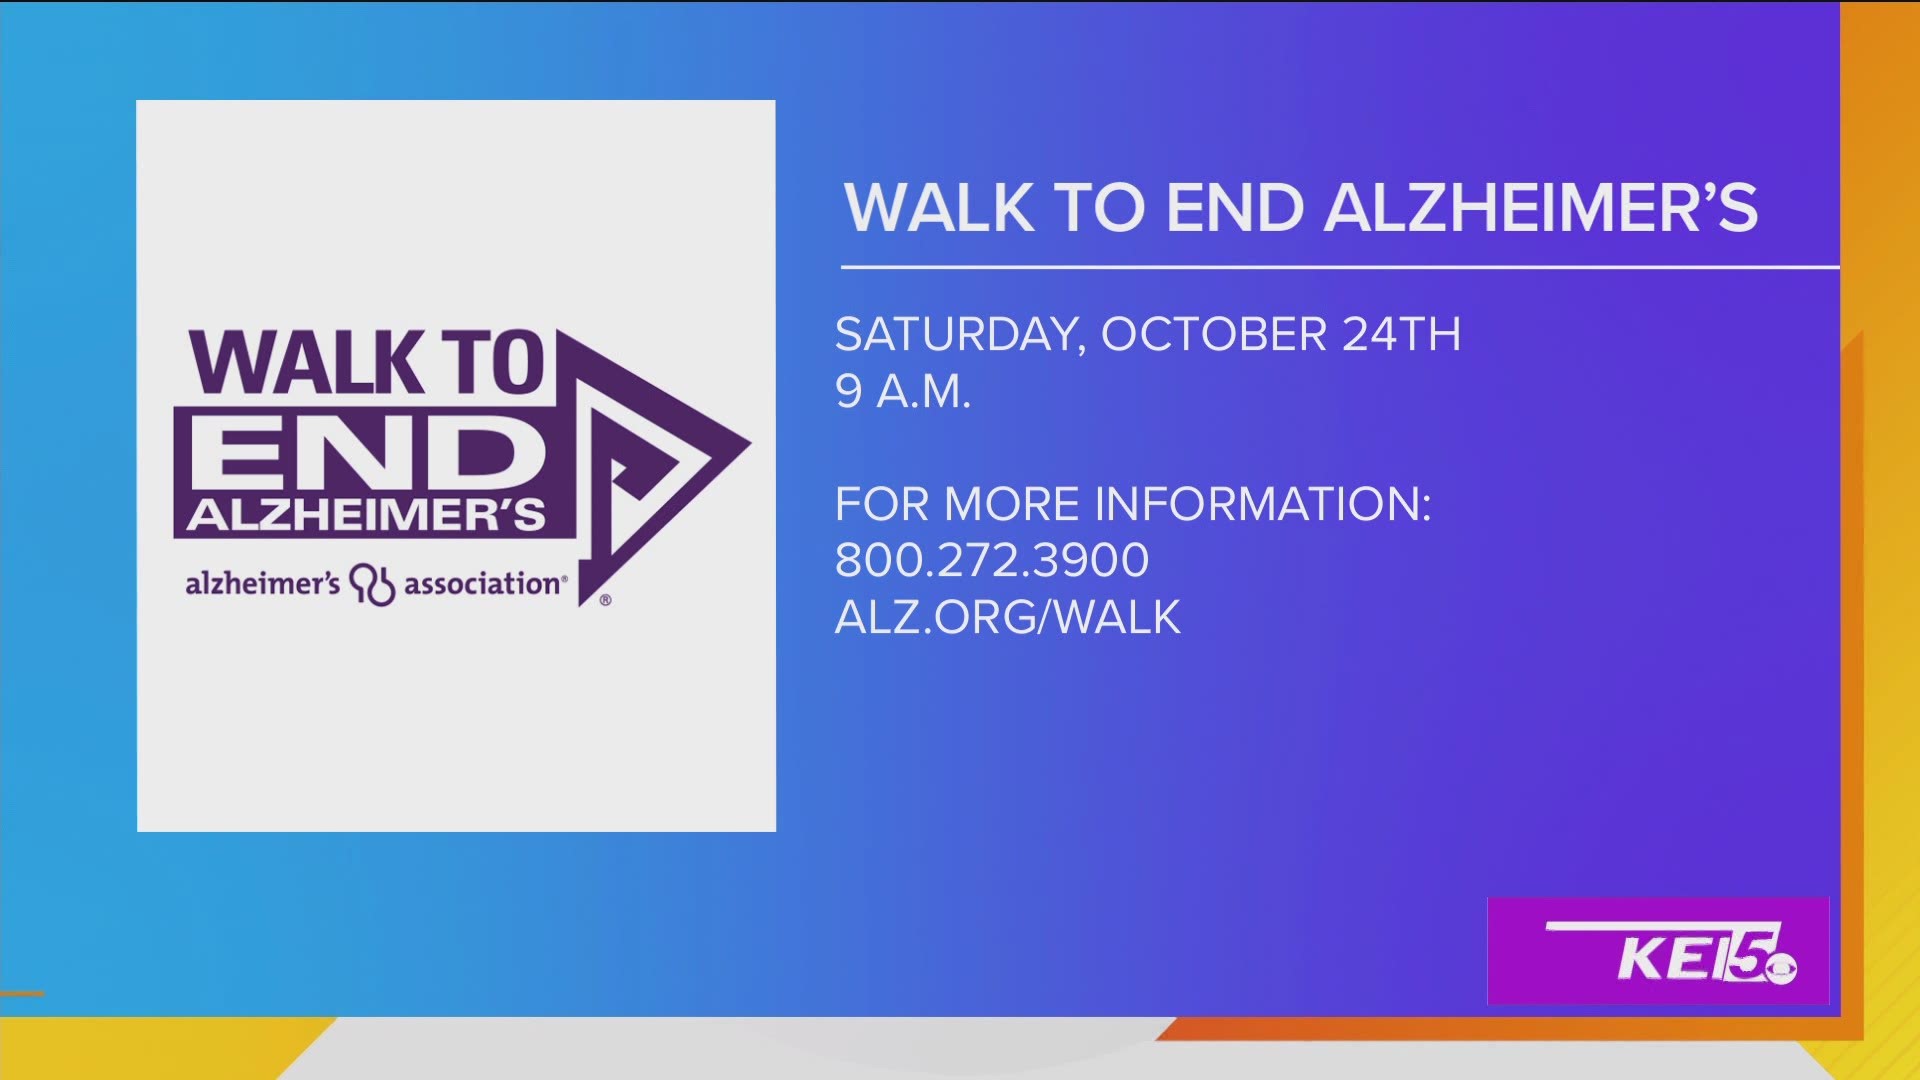 Jonathan Barker is a Committee Chair for the Alzheimer's Association in San Antonio. He shares more about the virtual walk happening this year.